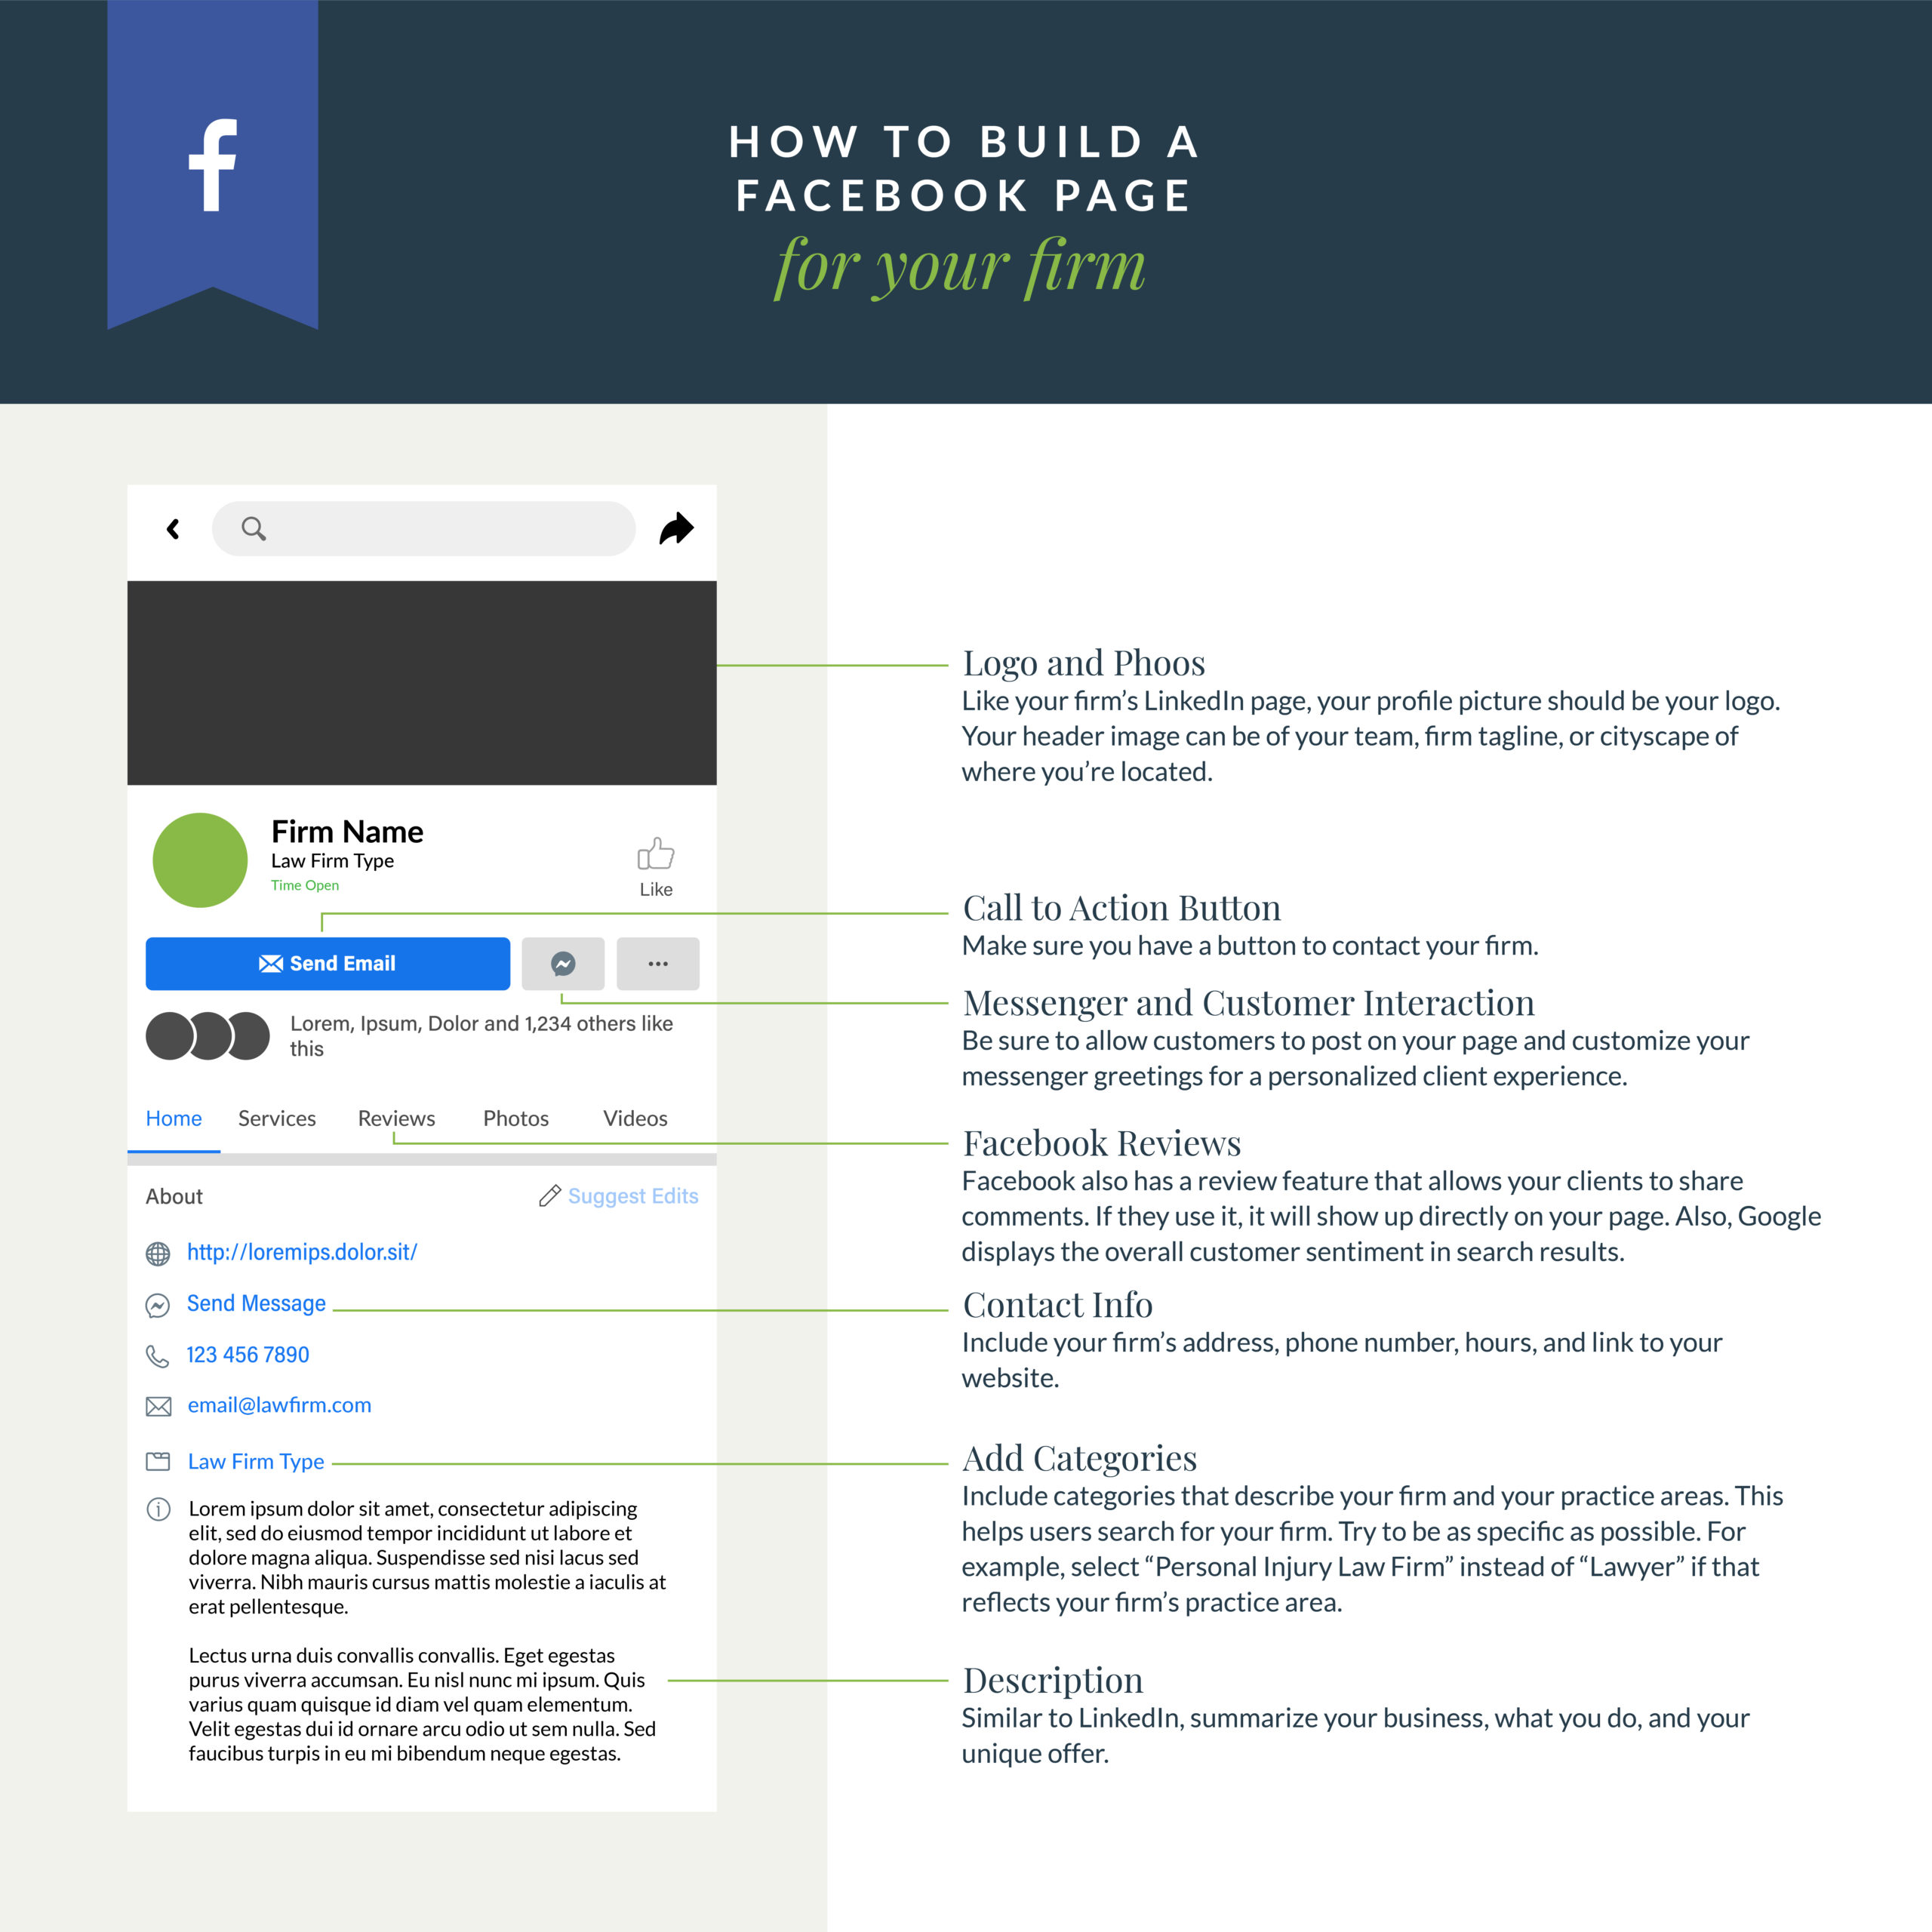 Infographic showing anatomy of a facebook page